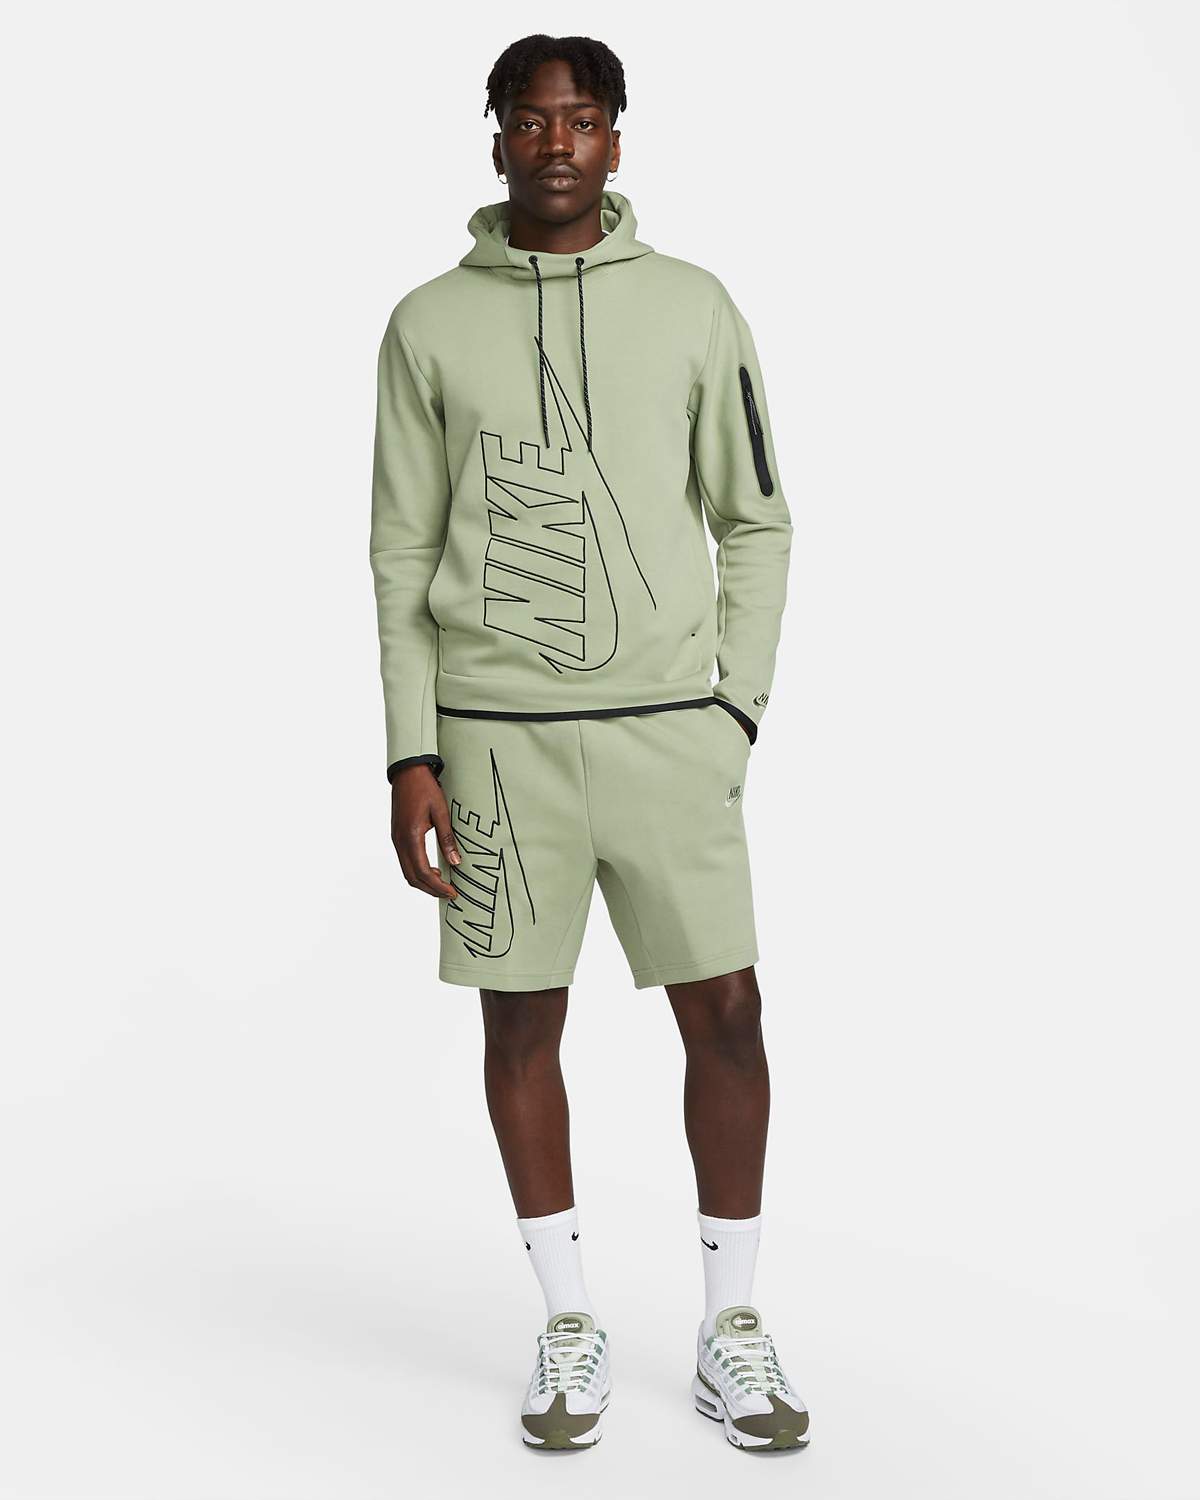 Nike Sportswear Oil Green Shirts Clothing Sneaker Outfits